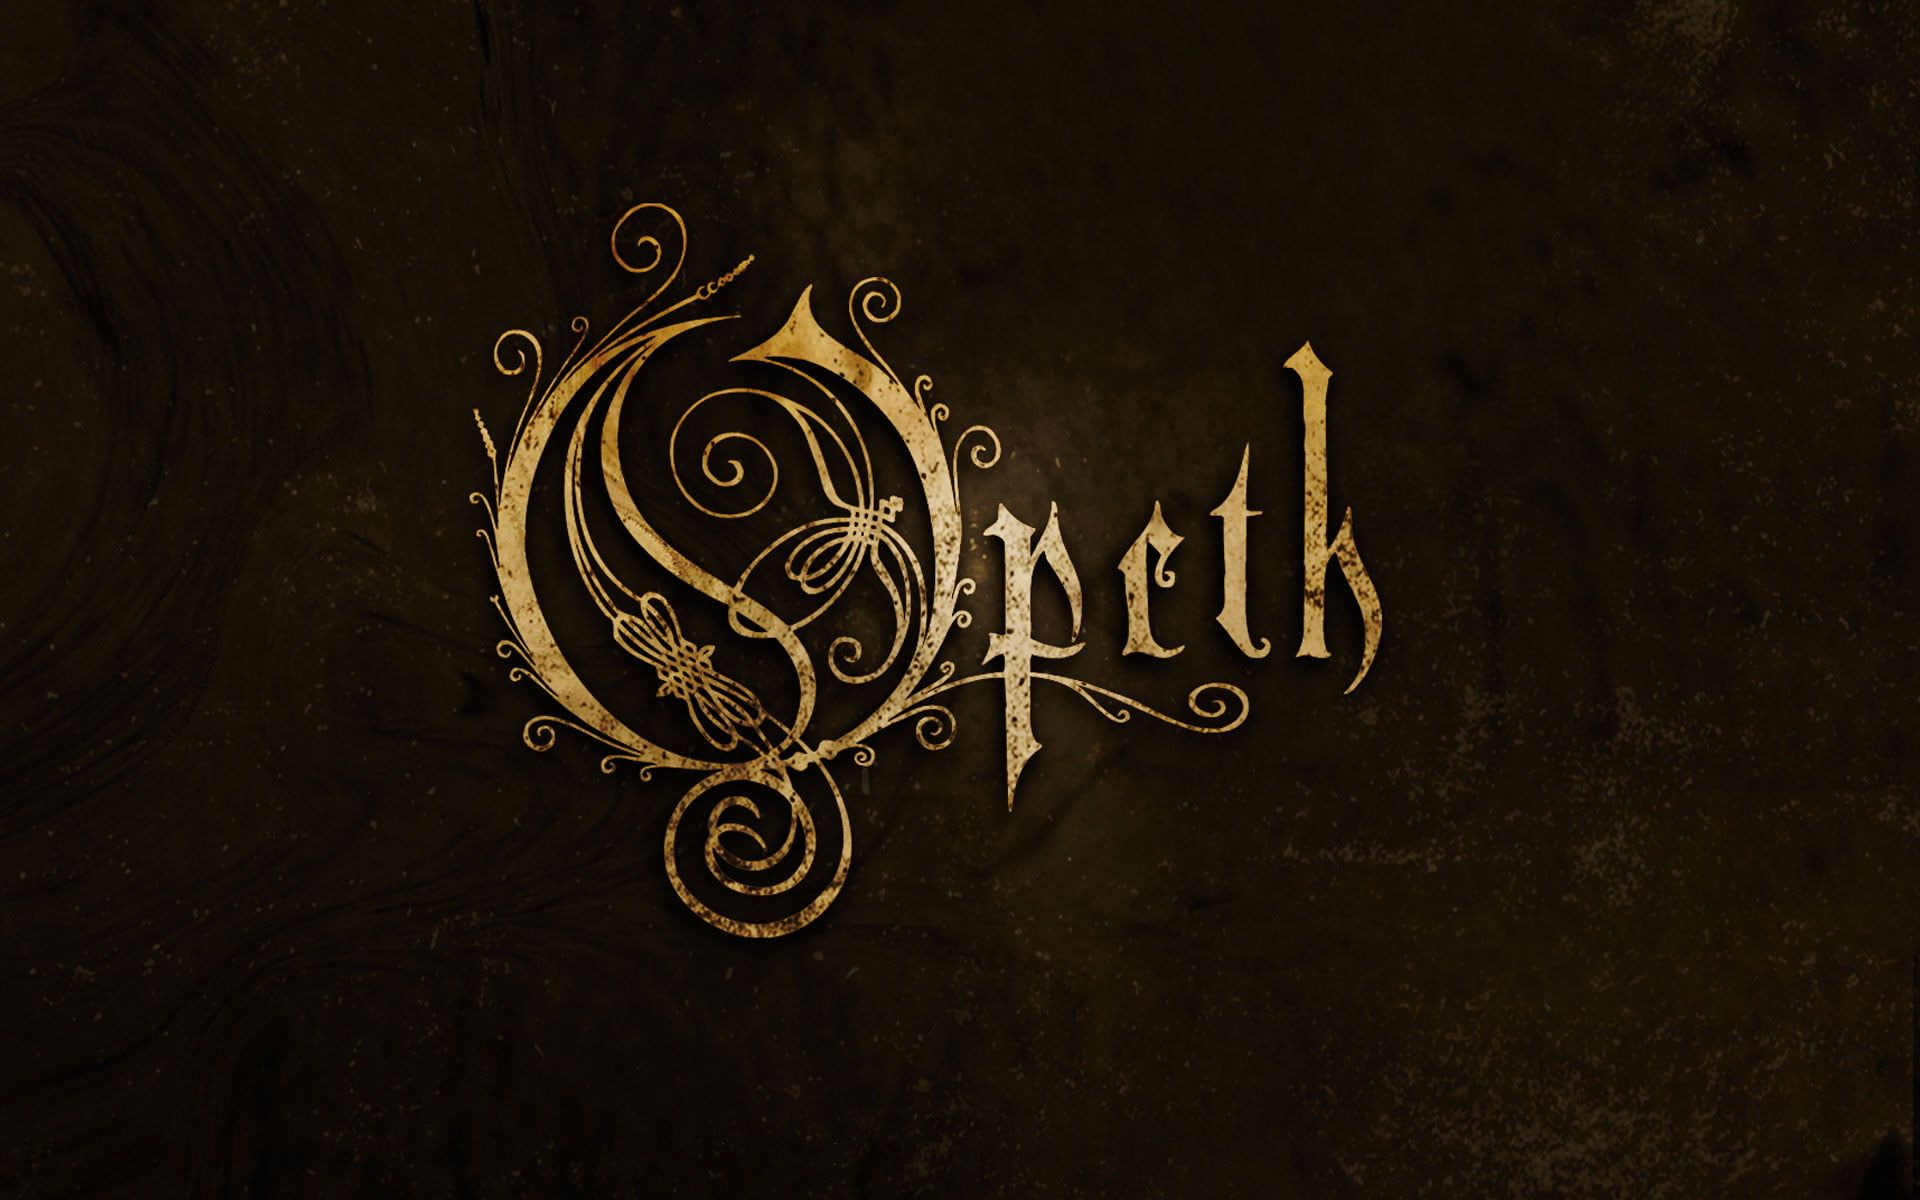 Opeth Band, brown pcth text, Music, music band, swedish, heavy metal